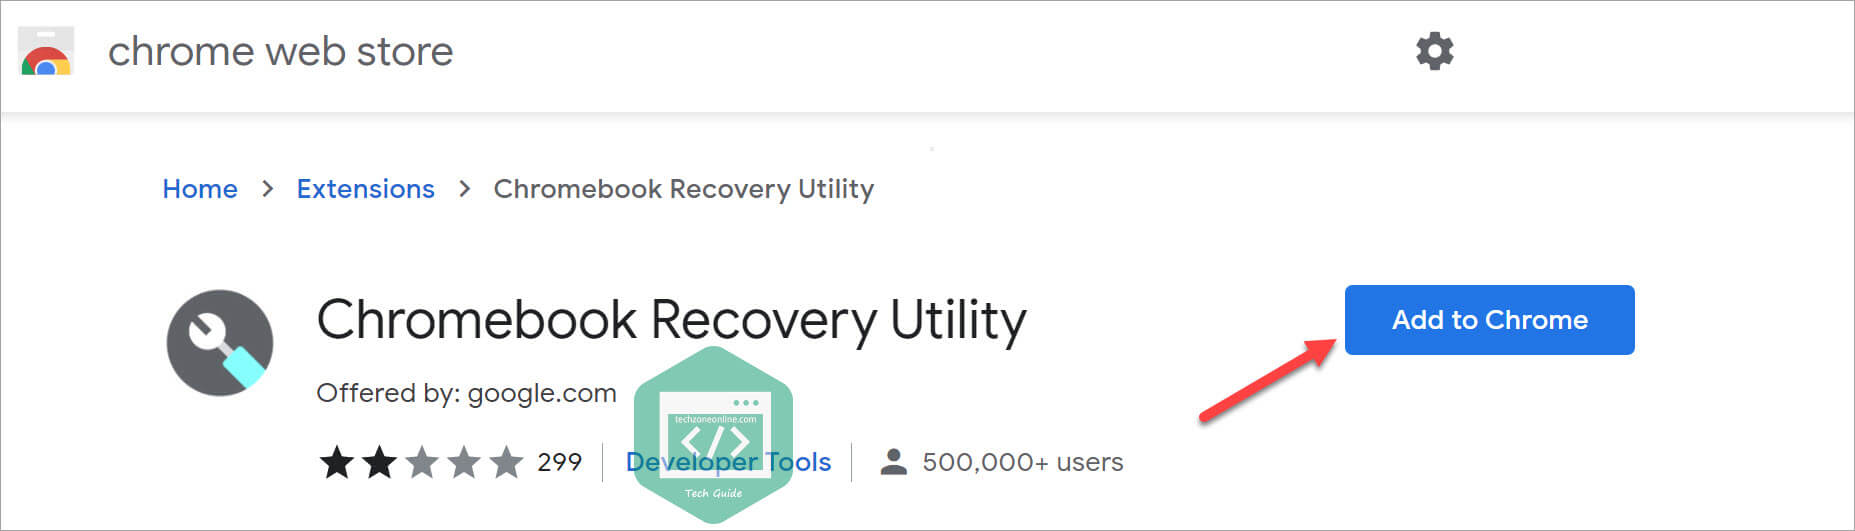 Add Chromebook Recovery Utility to Chrome